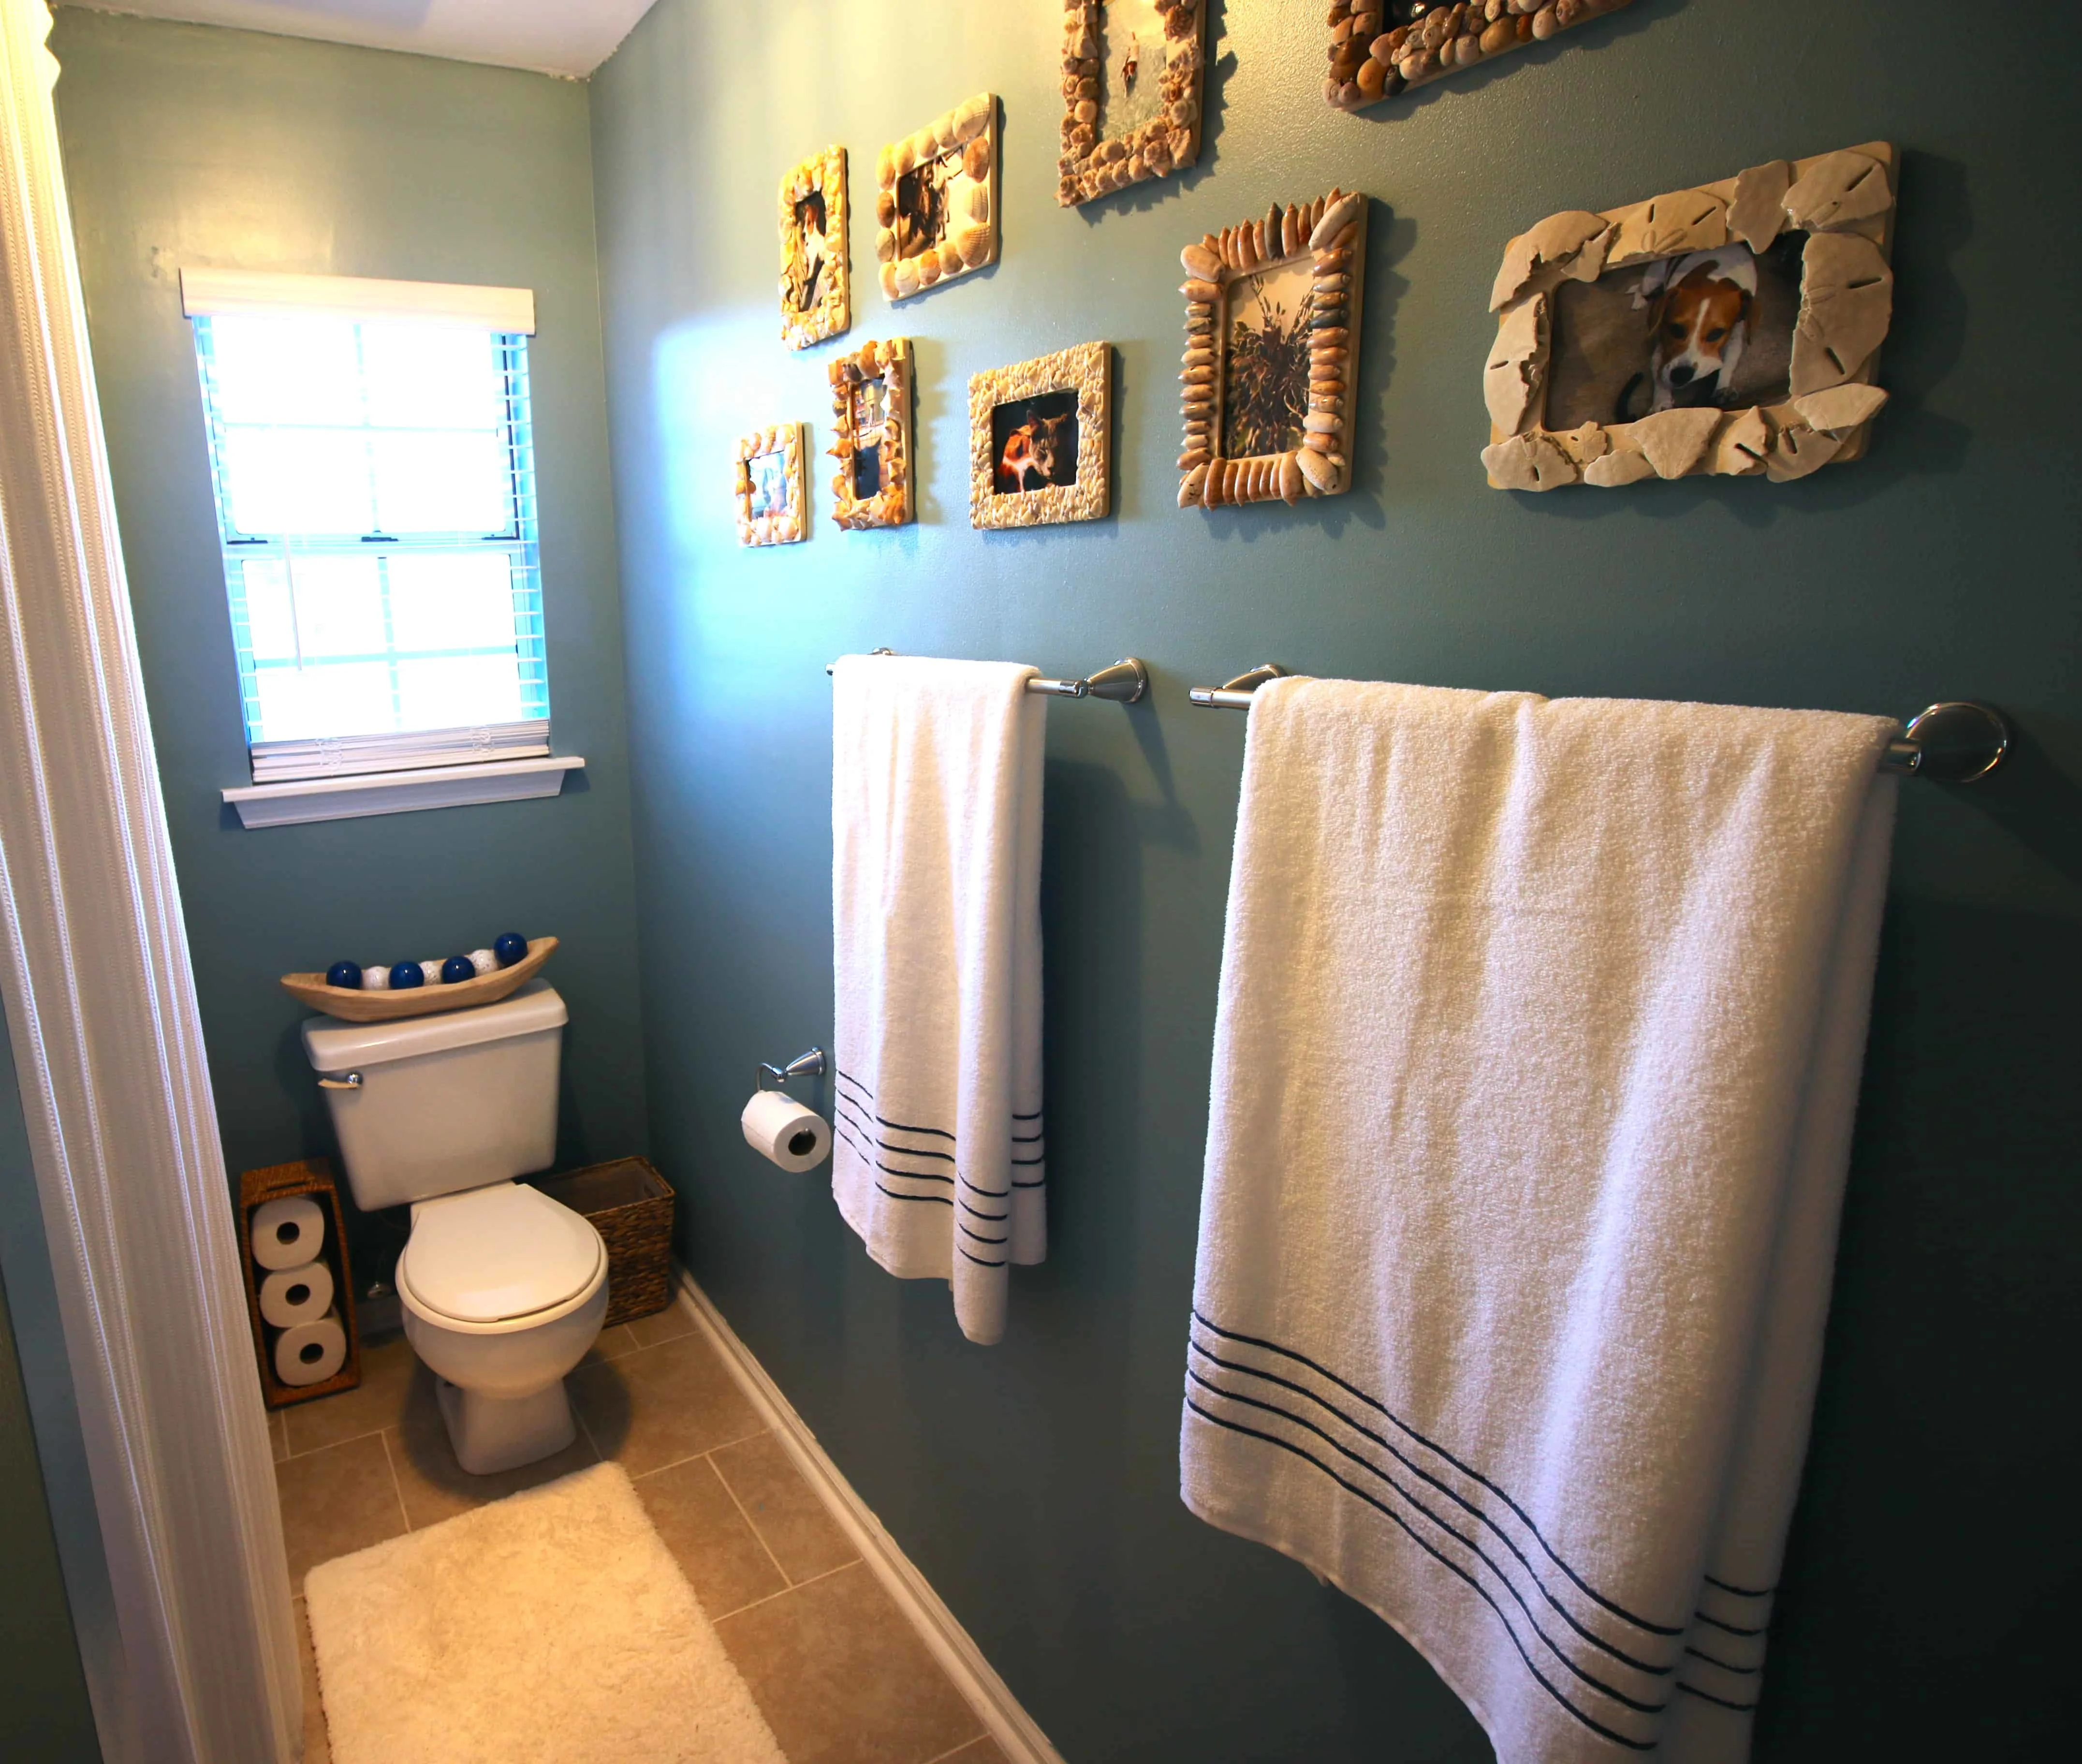 5 Ways to Give Your Bathroom an Instant Rustic Refresh - Charleston Crafted